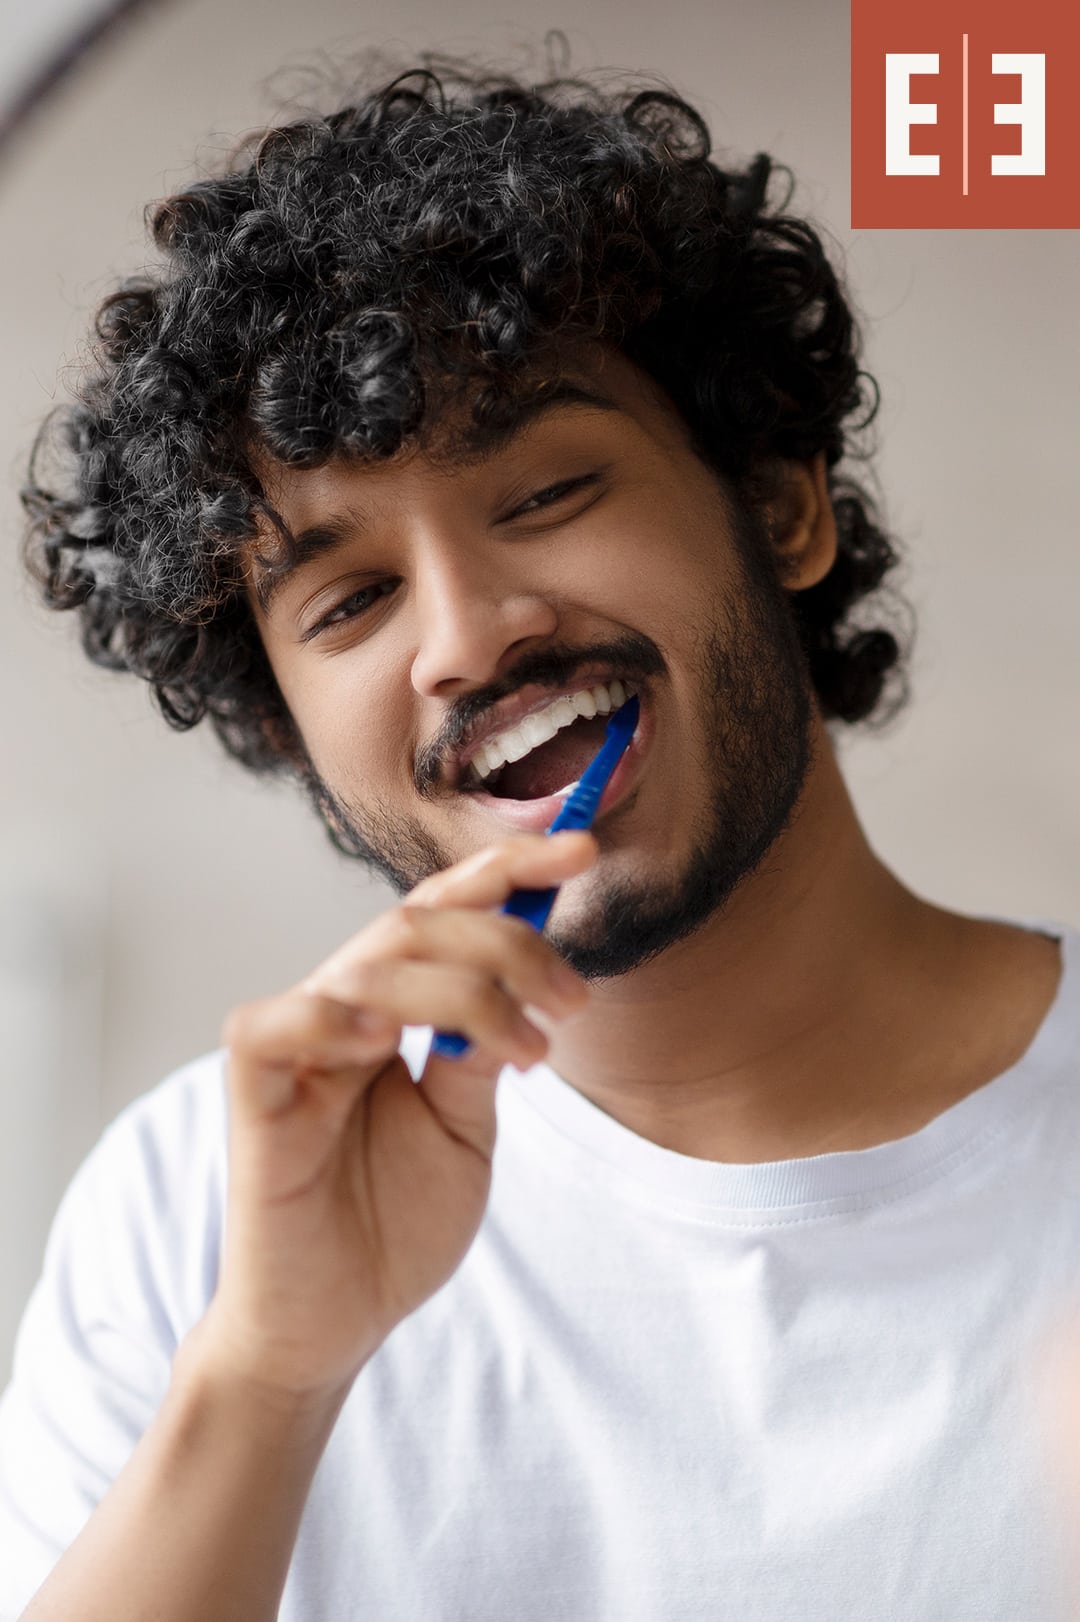 A young curly haired man brushing his teeth at esteem dental studio